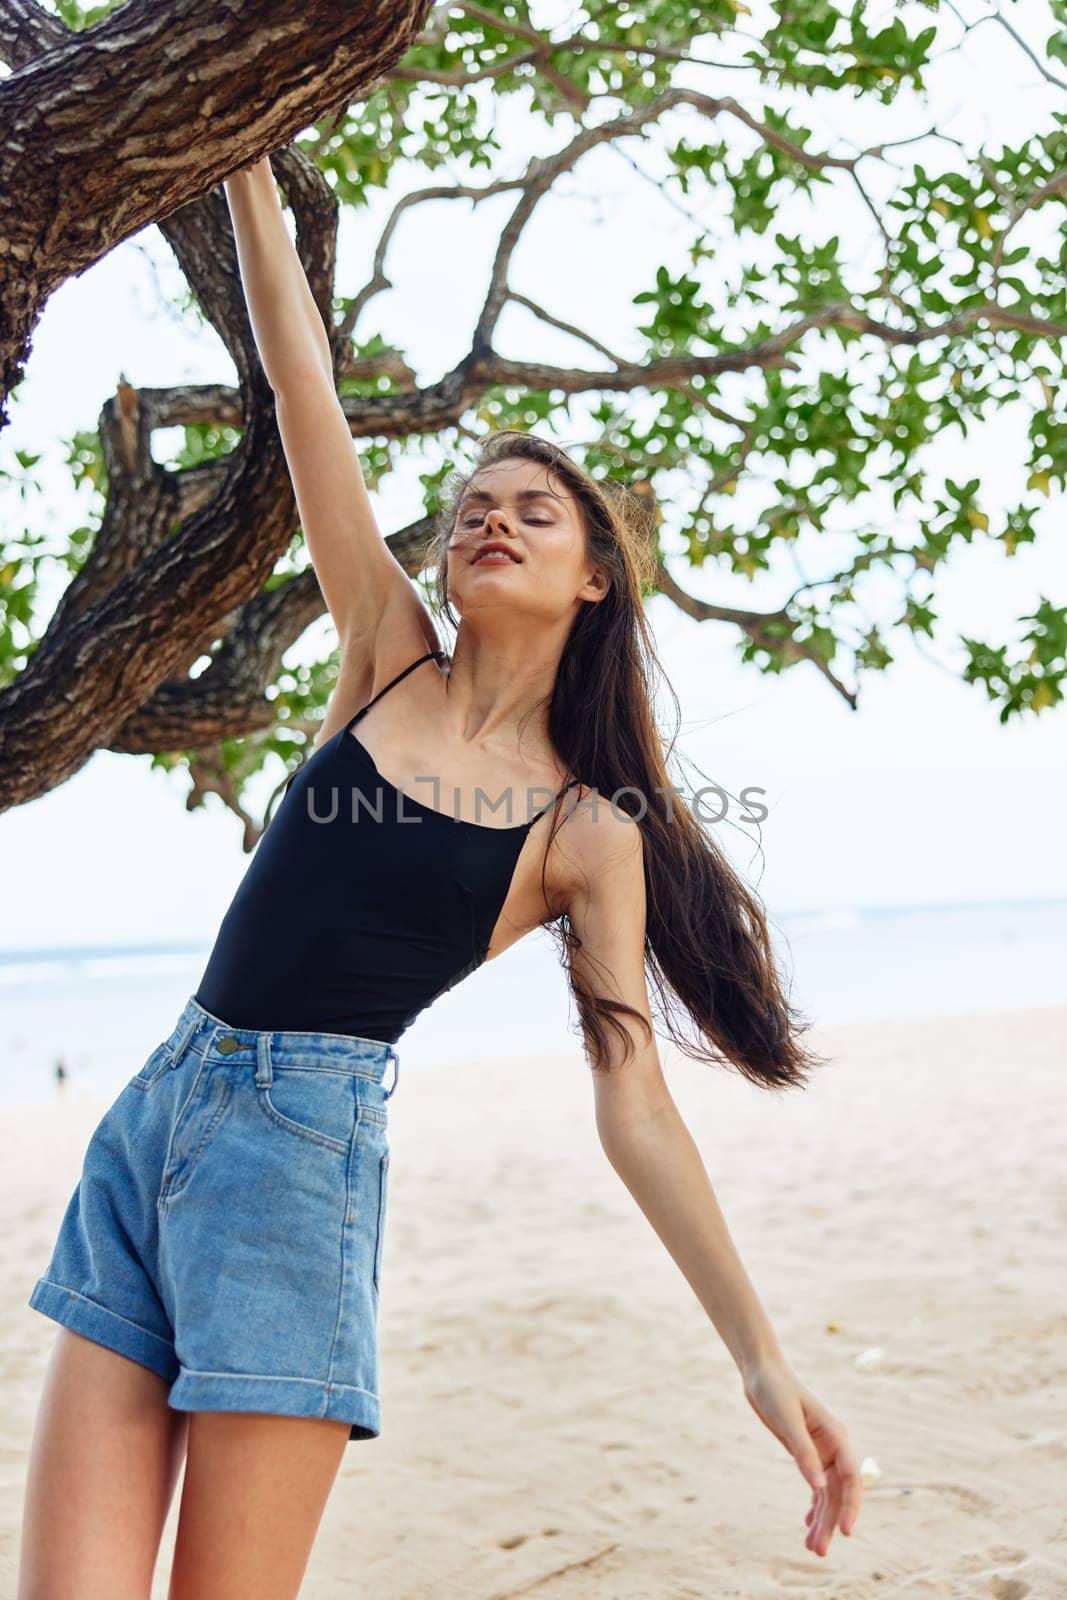 relax woman sky palm paradise sea girl hanging nature hat young relaxation summer smiling holiday model vacation lifestyle fool tree person